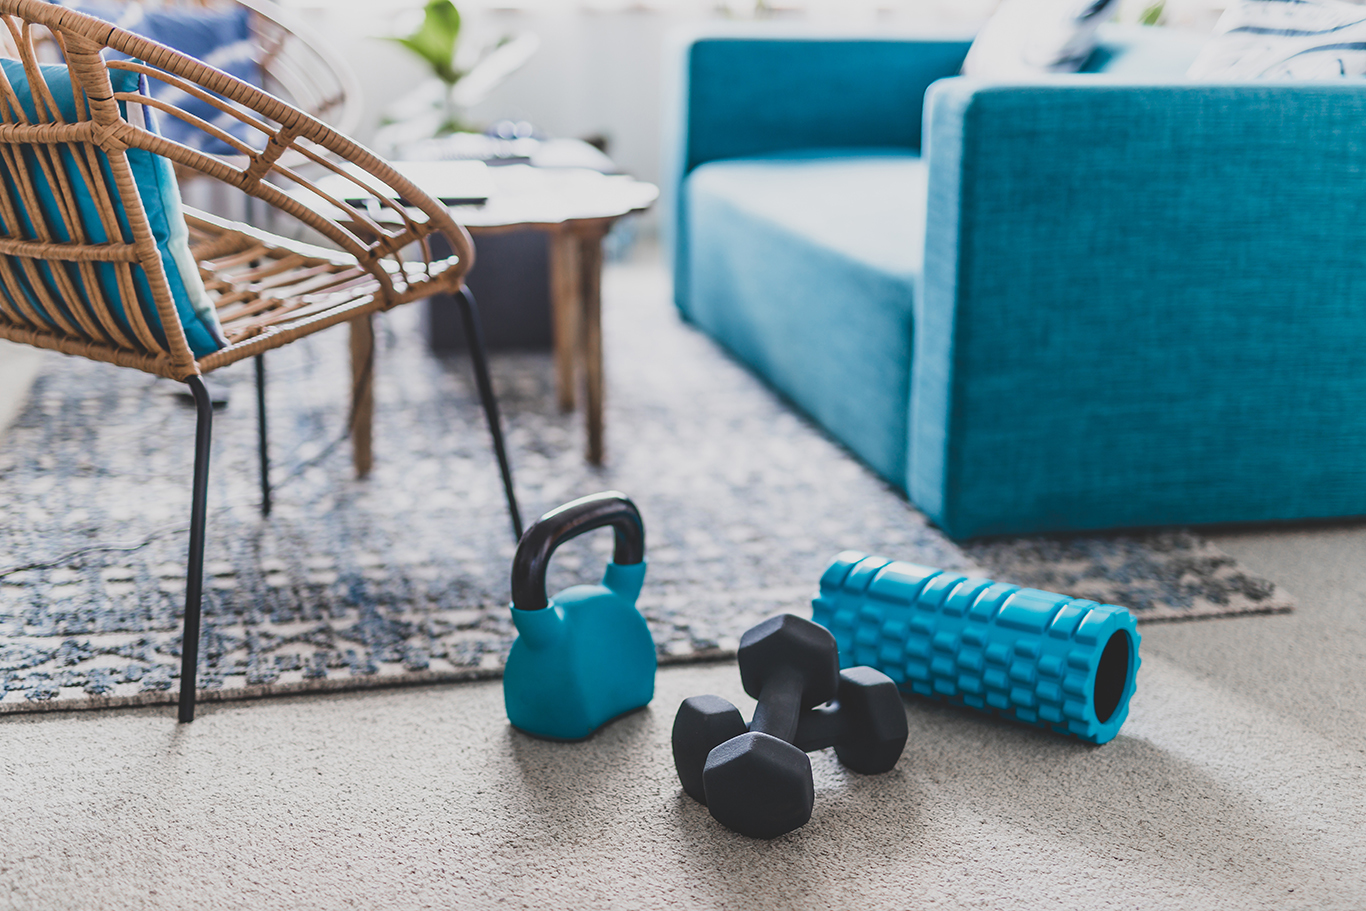 7 Workout essentials for at-home fitness sessions